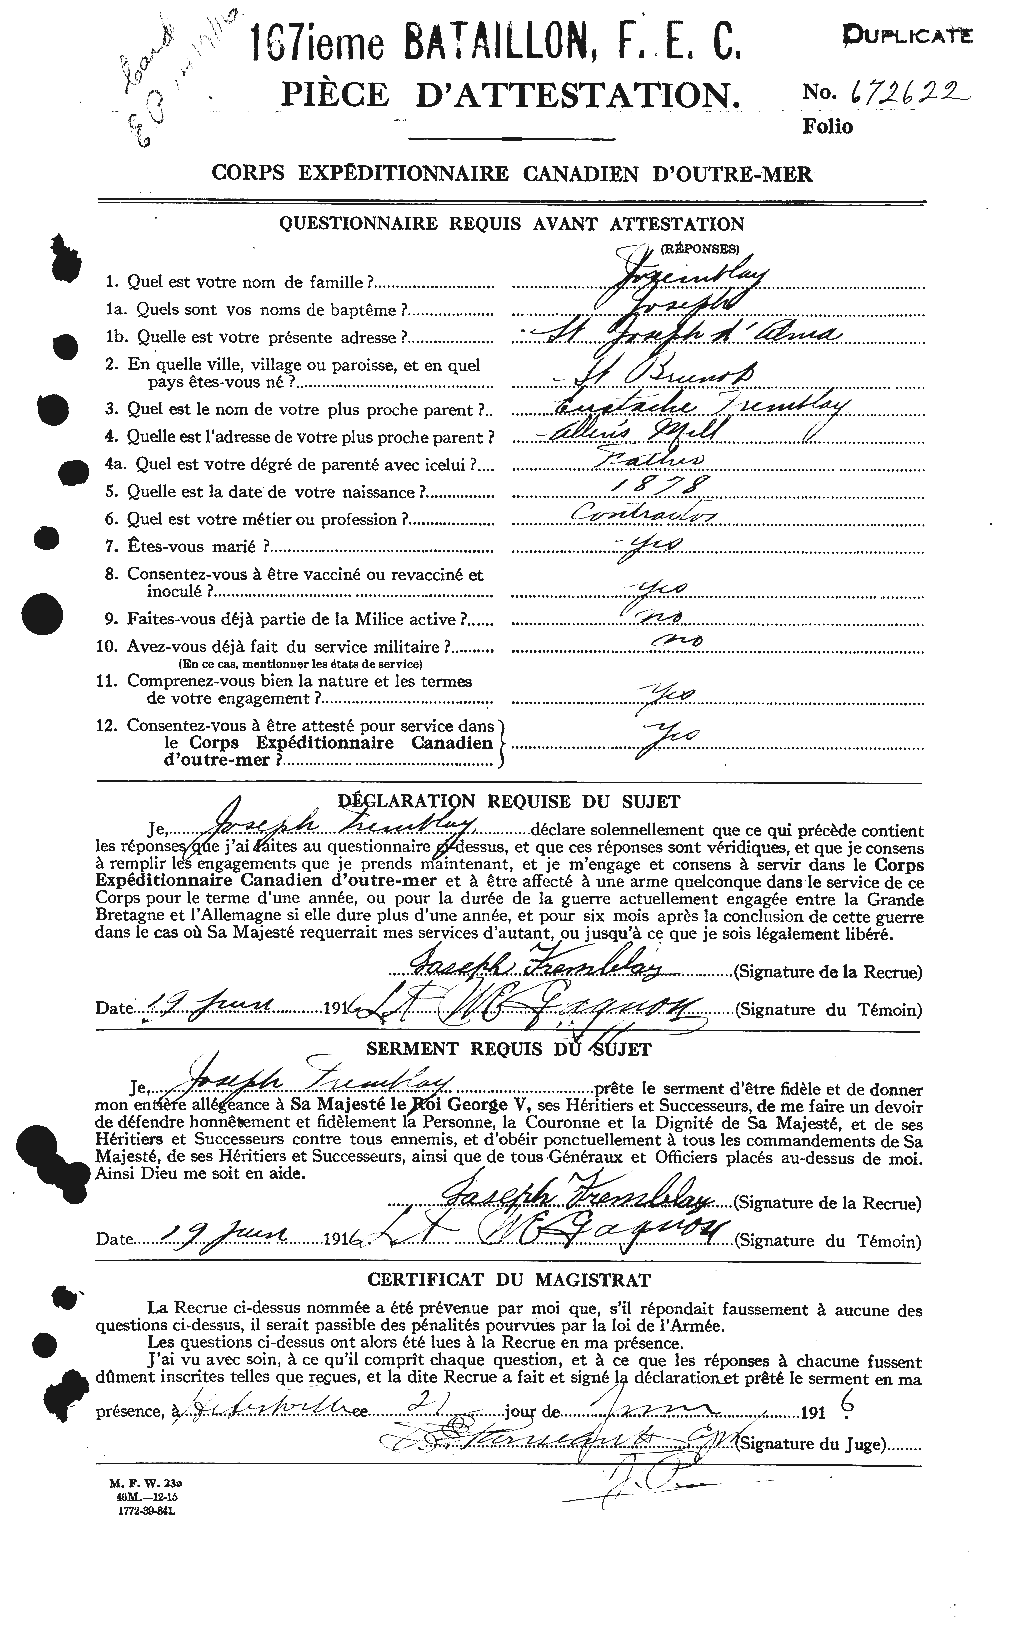 Personnel Records of the First World War - CEF 639130a